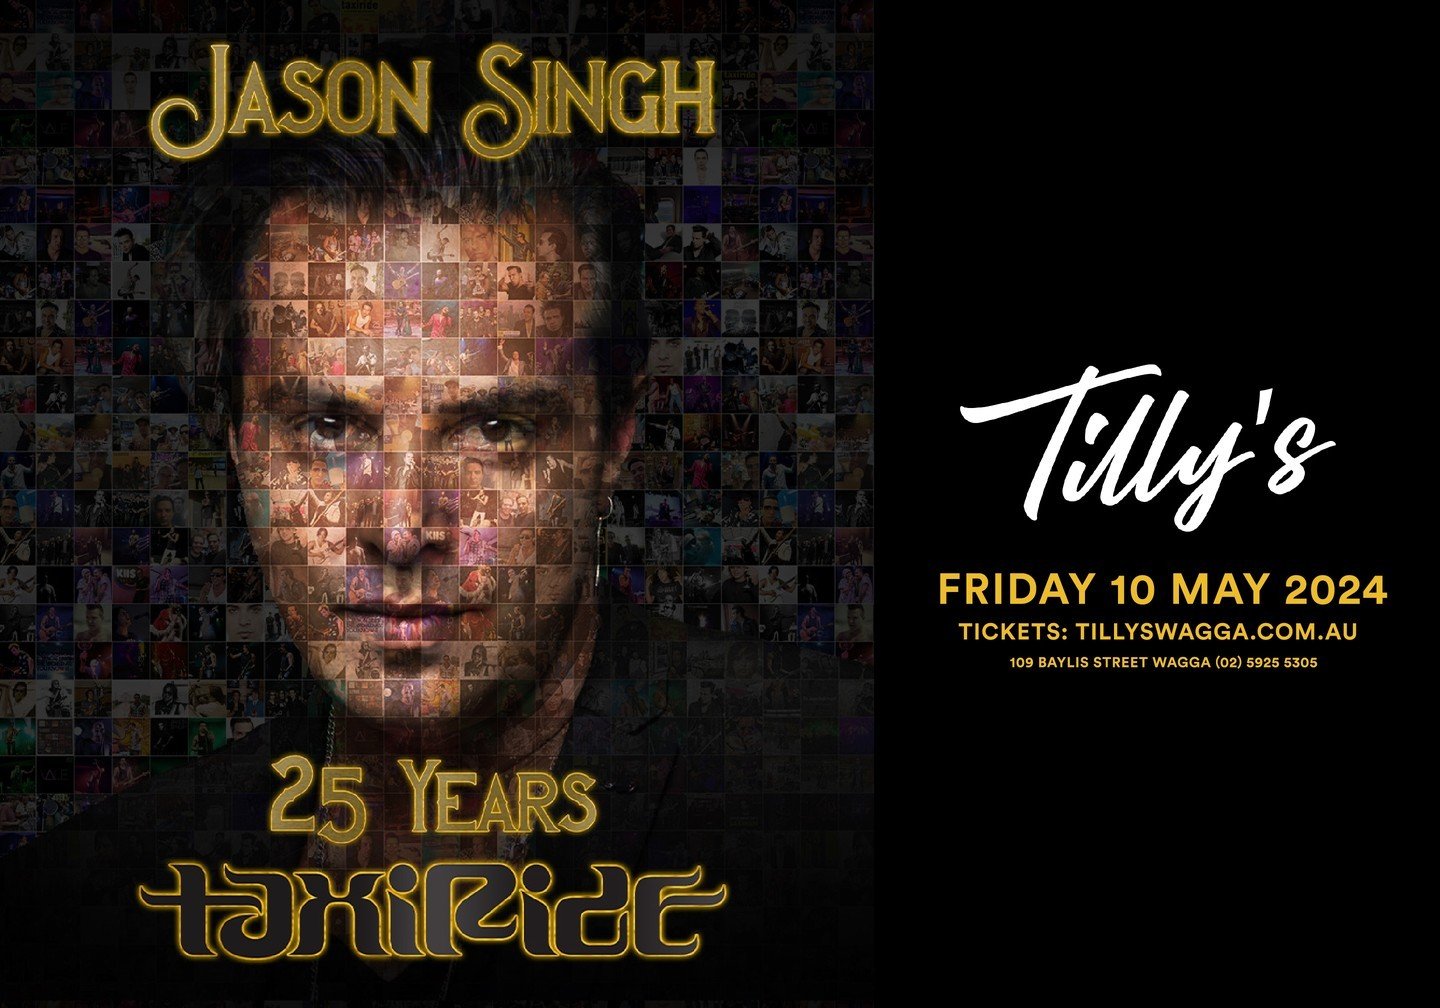 Last chance for tickets! Don't miss Jason Singh tonight at Tilly's celebrating 25 years of Taxiride! Supported by Nathan Lamont + Brett Wood! 🎶🎸

Doors from 7pm https://events.humanitix.com/jason-singh-25-years-of-taxiride-tw7fwjhg

Jason is the or